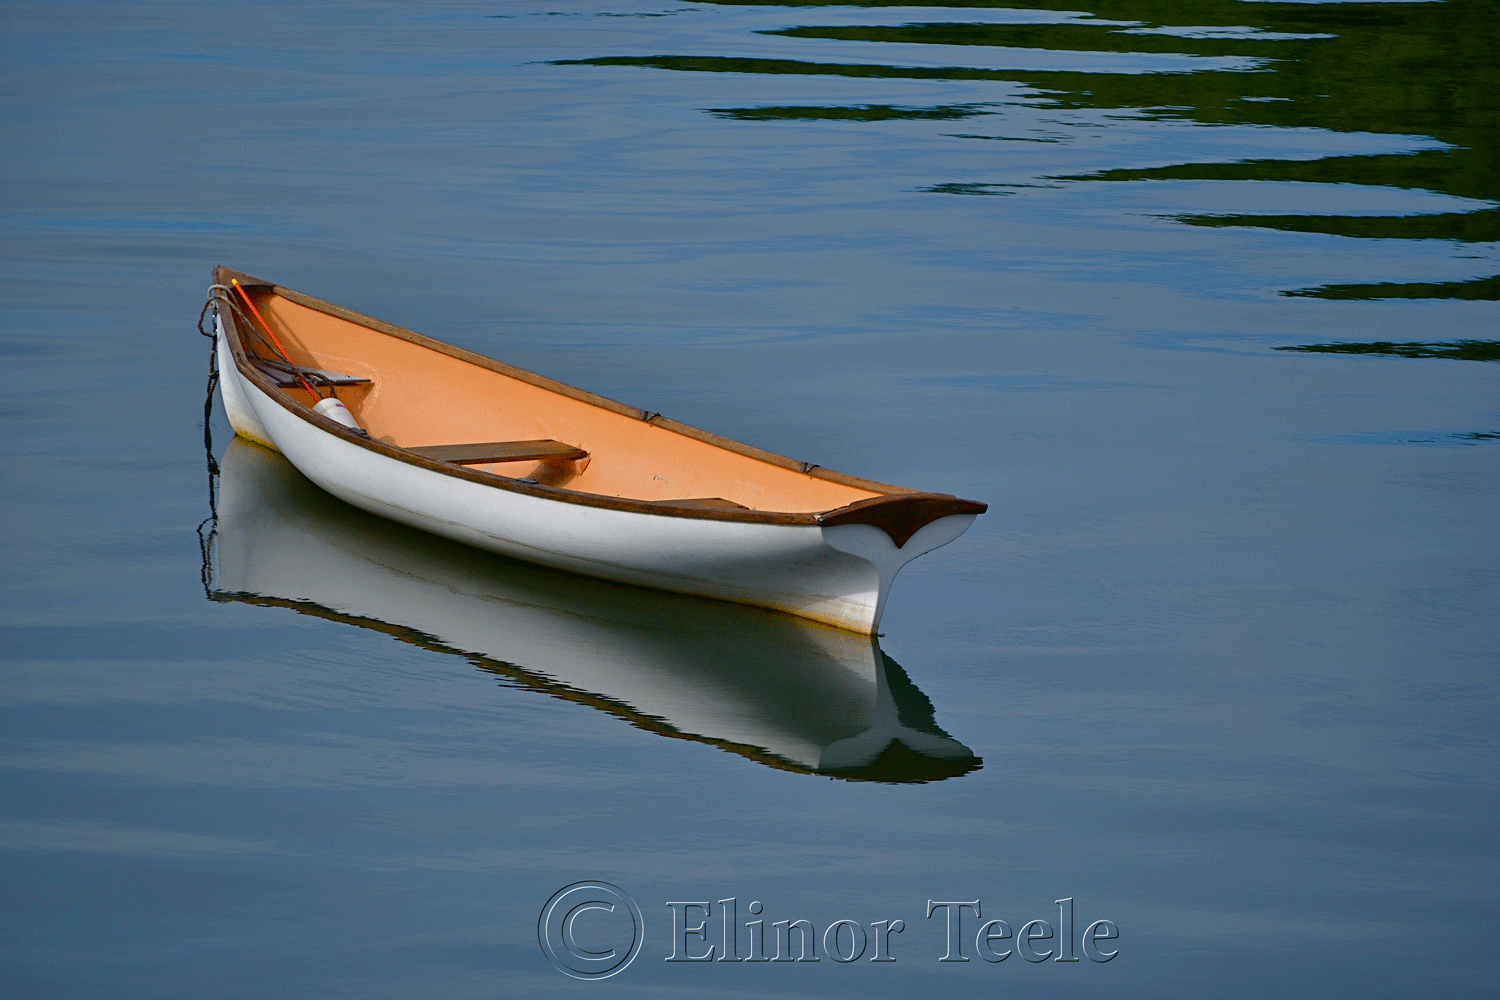 Whitehall Rowboat in the Evening